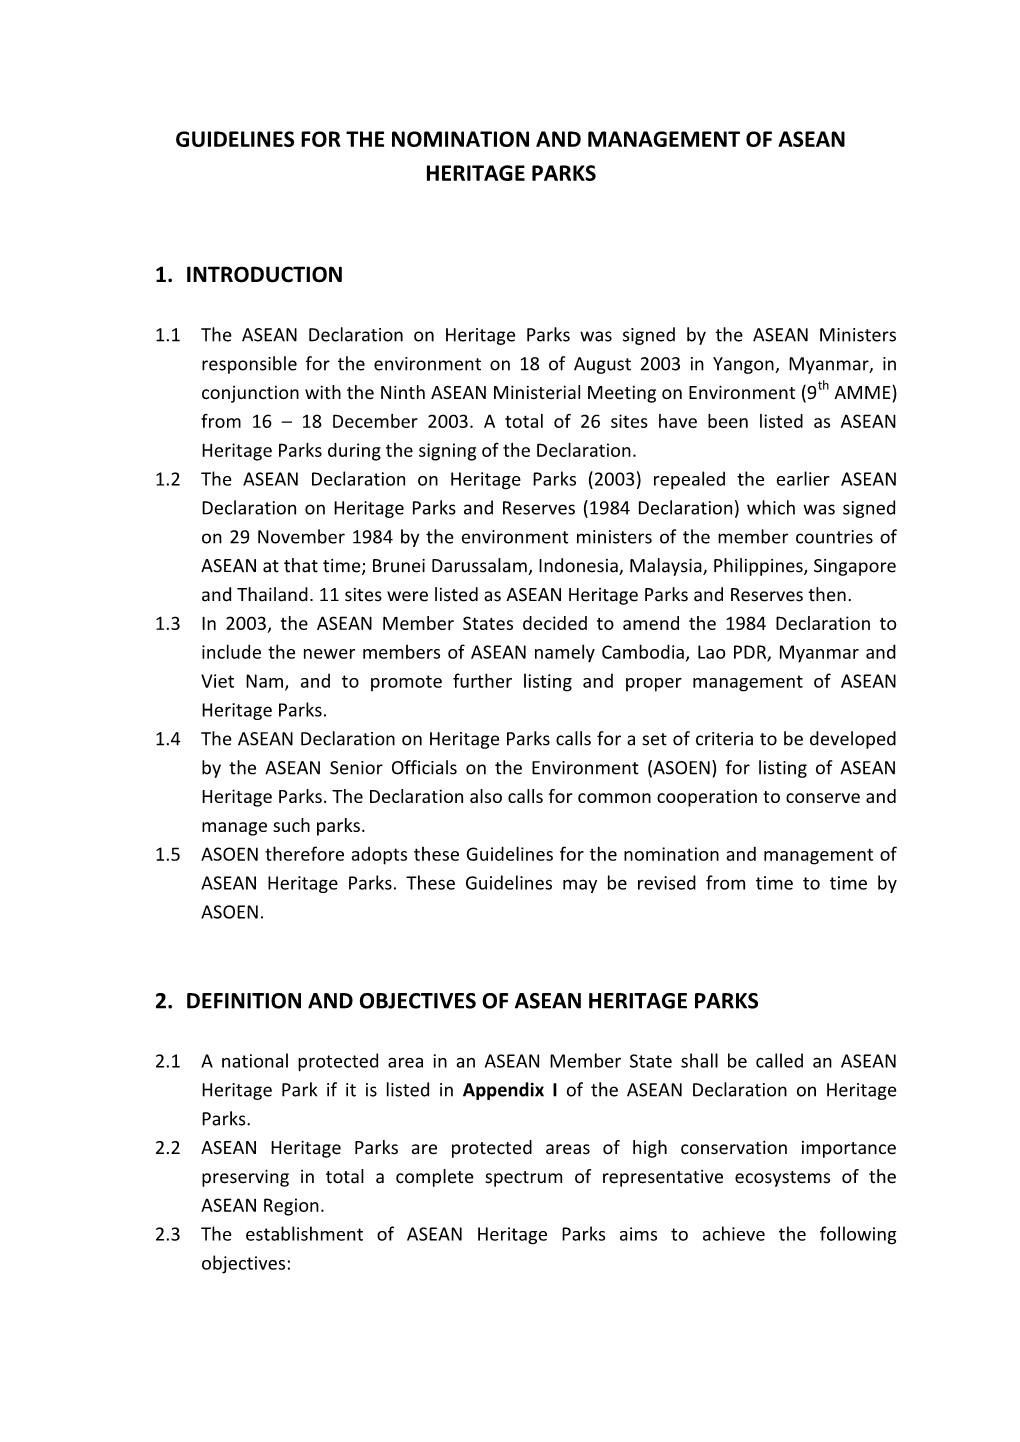 Guidelines for the Nomination and Management of Asean Heritage Parks